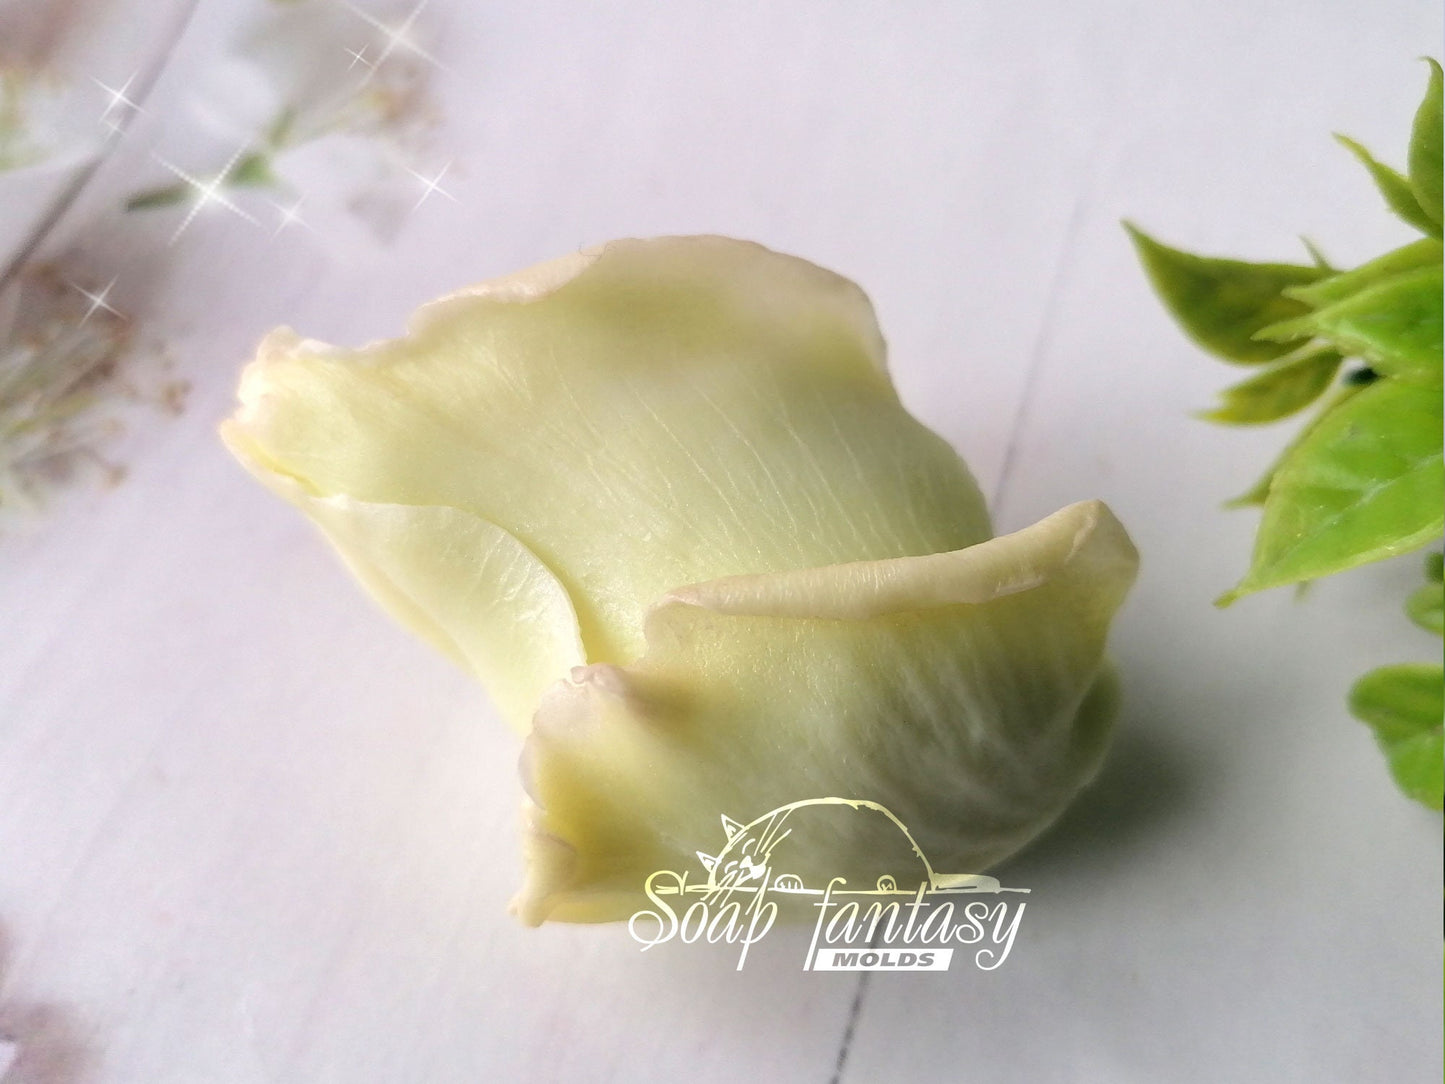 Rose bud "Grace" silicone mold for soap making